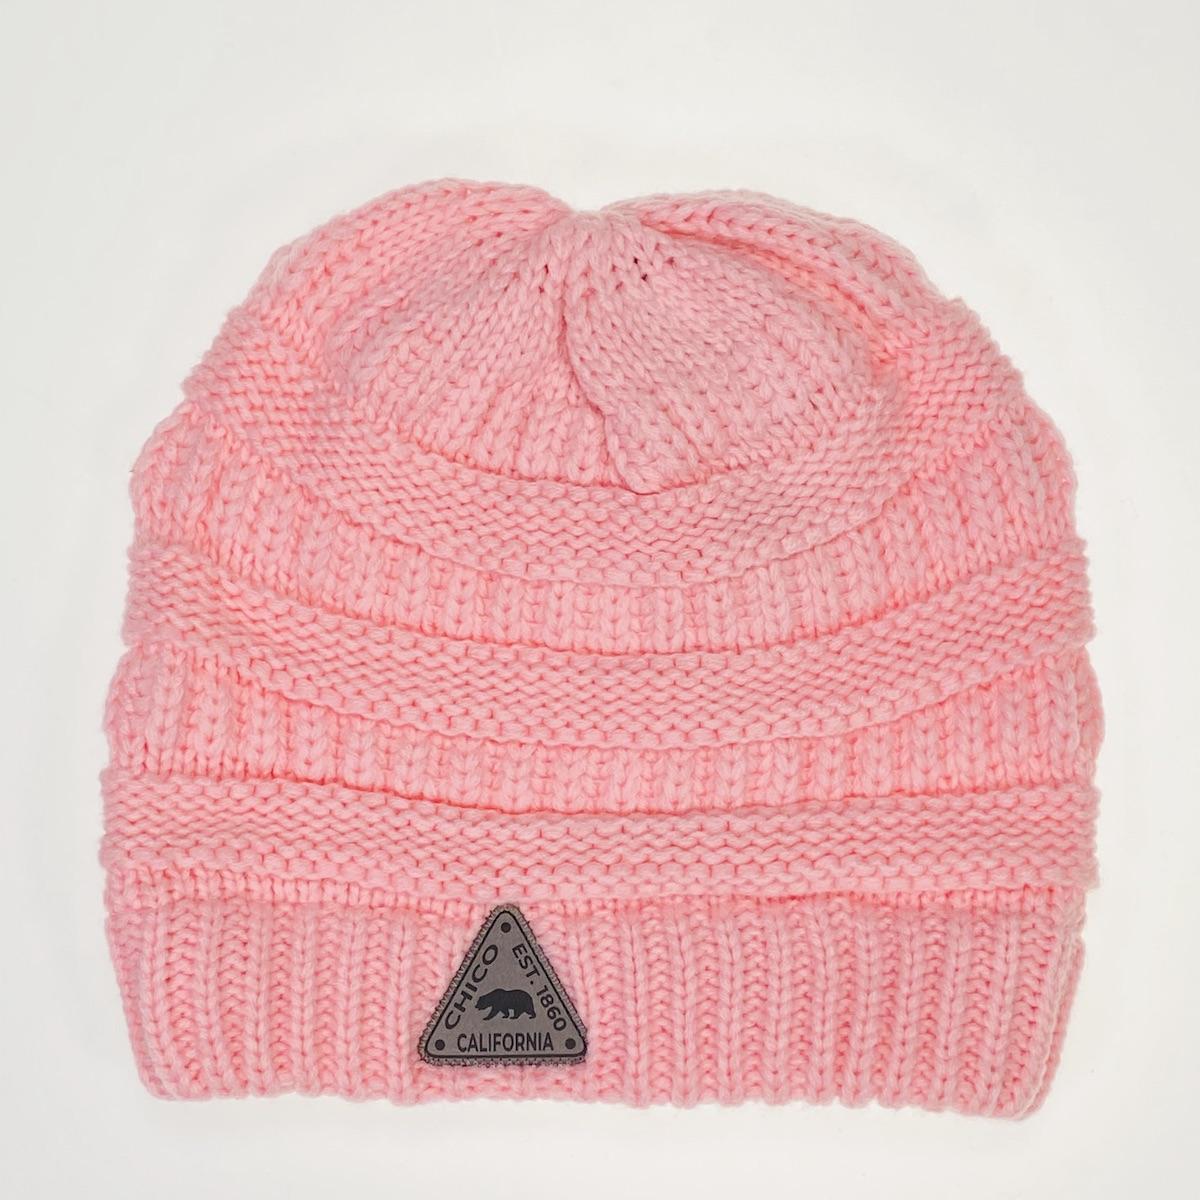 Knit Chico Beanie with Small Patch ROSE QUARTZ   